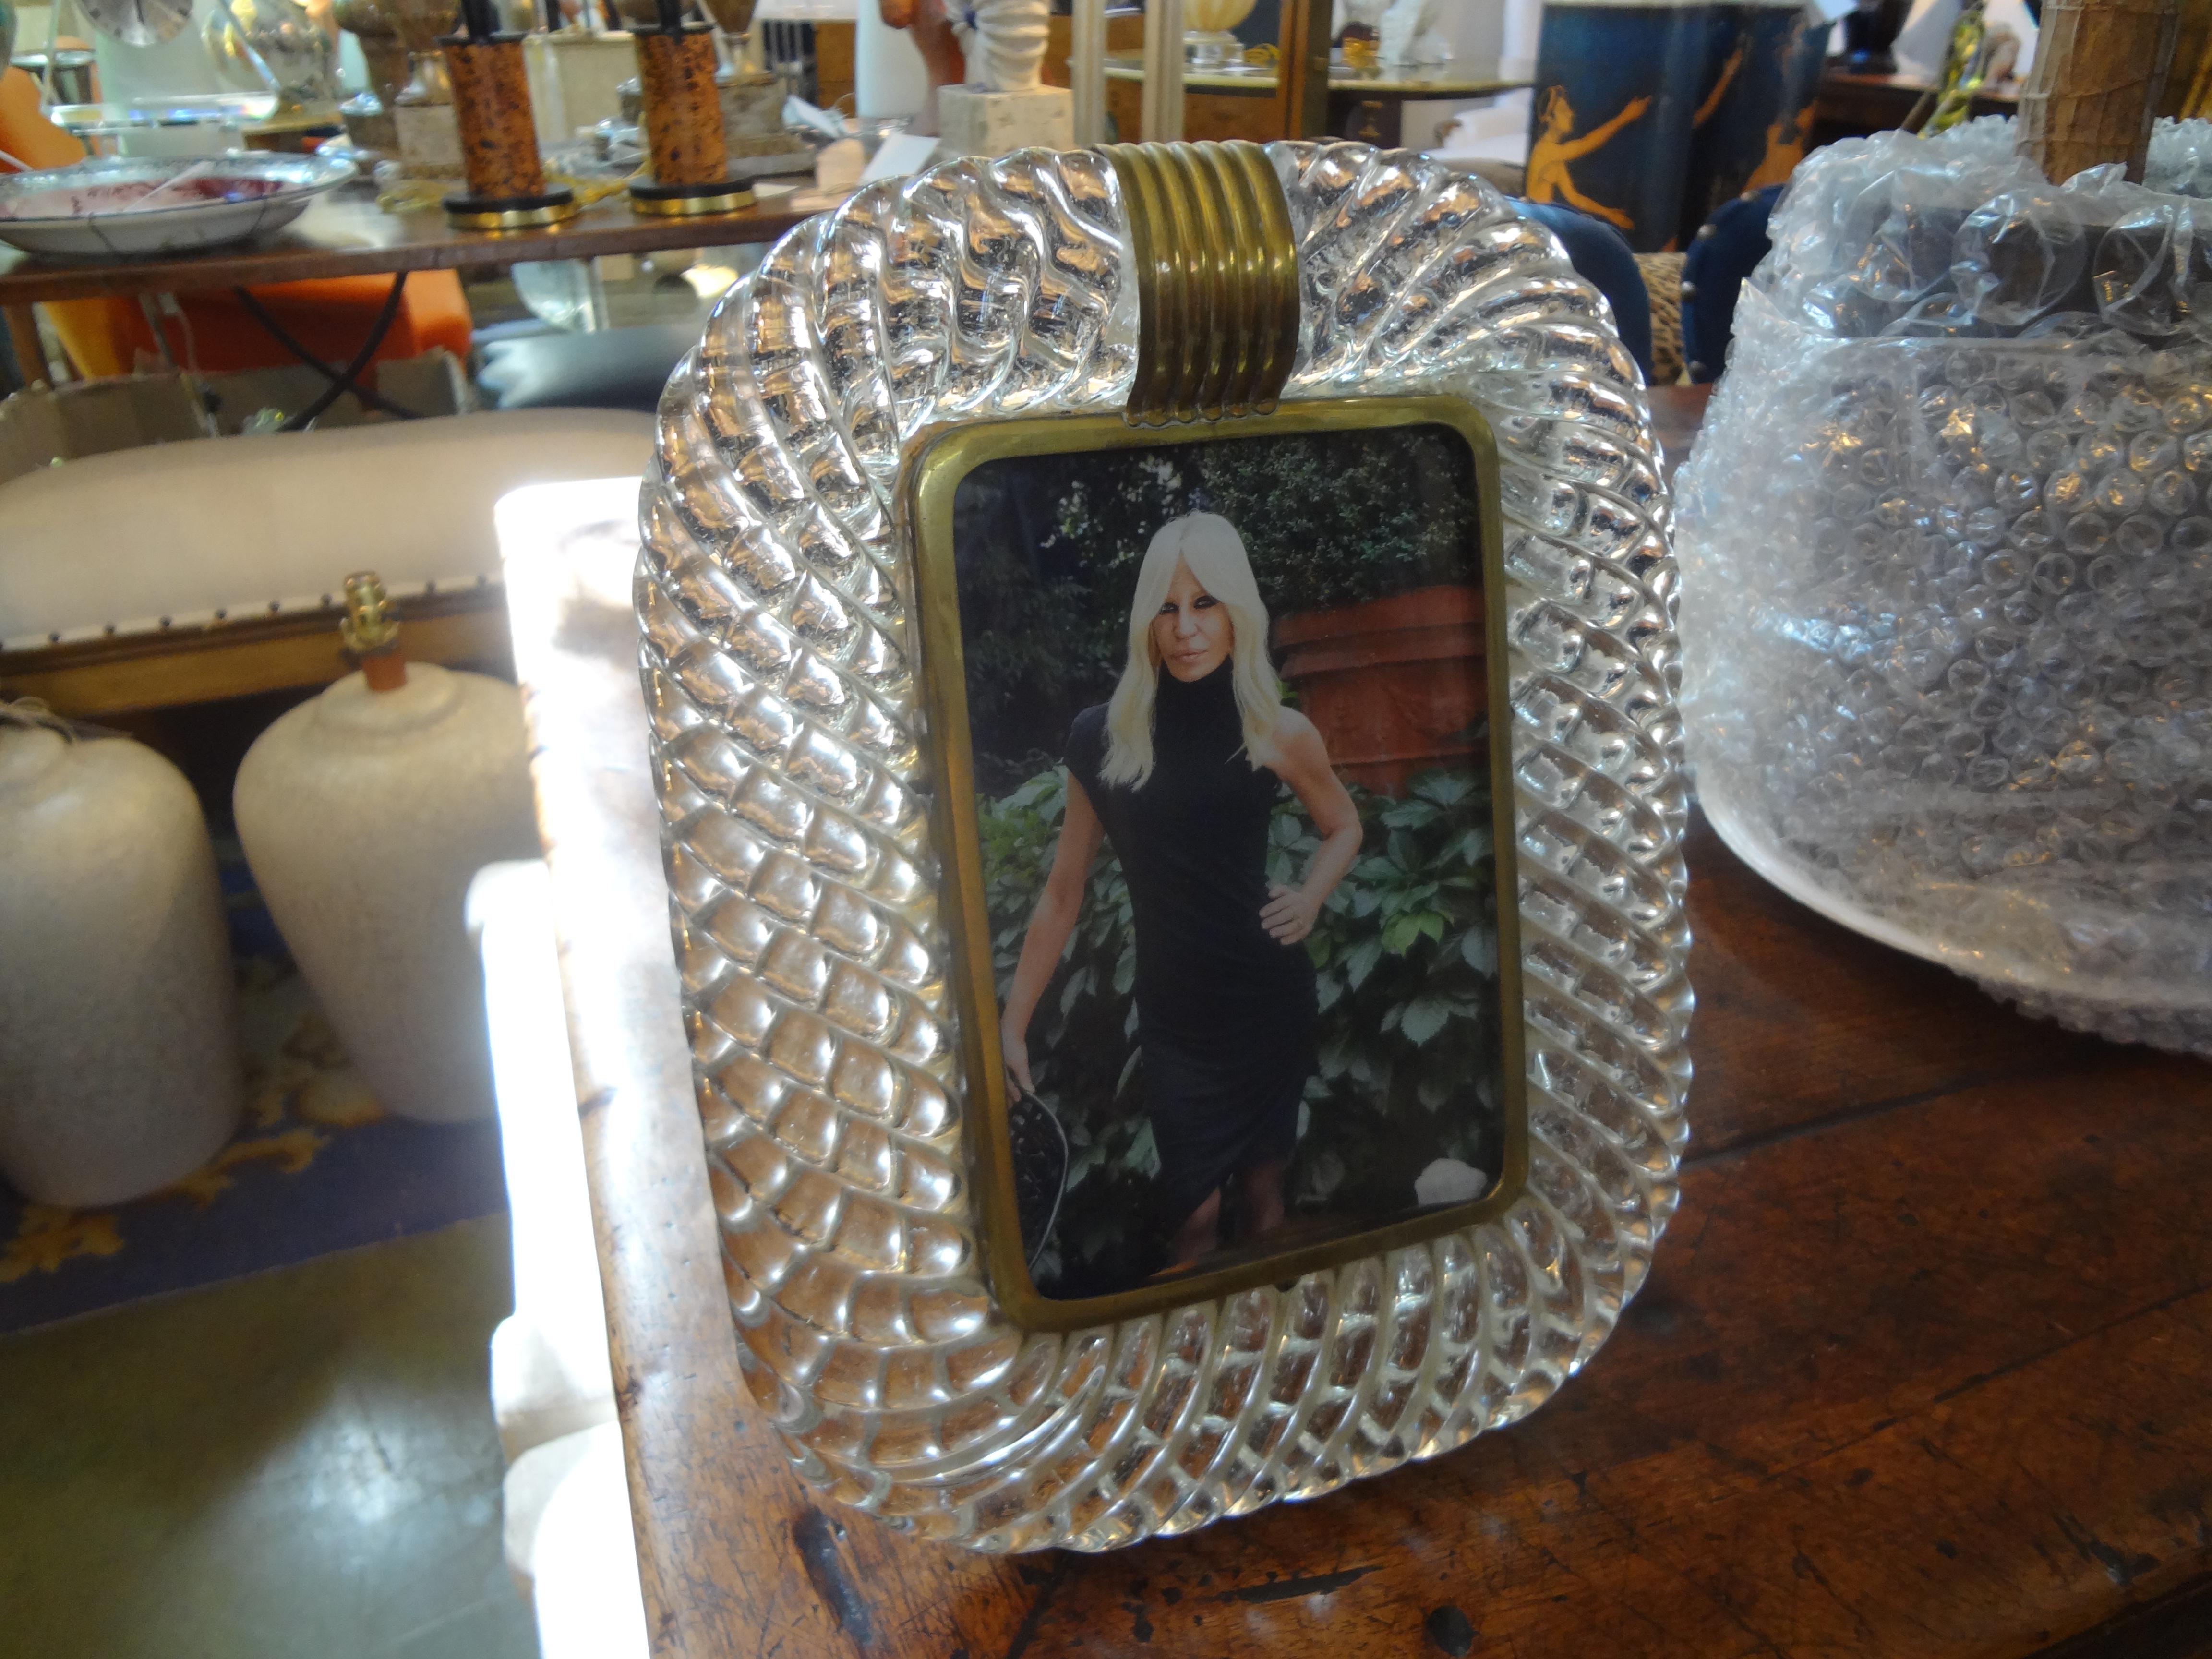 Stunning Treccia or torchon twisted murano glass and bronze photo frame by Venini. This vintage clear Italian Murano glass picture frame dates to the 1940s.